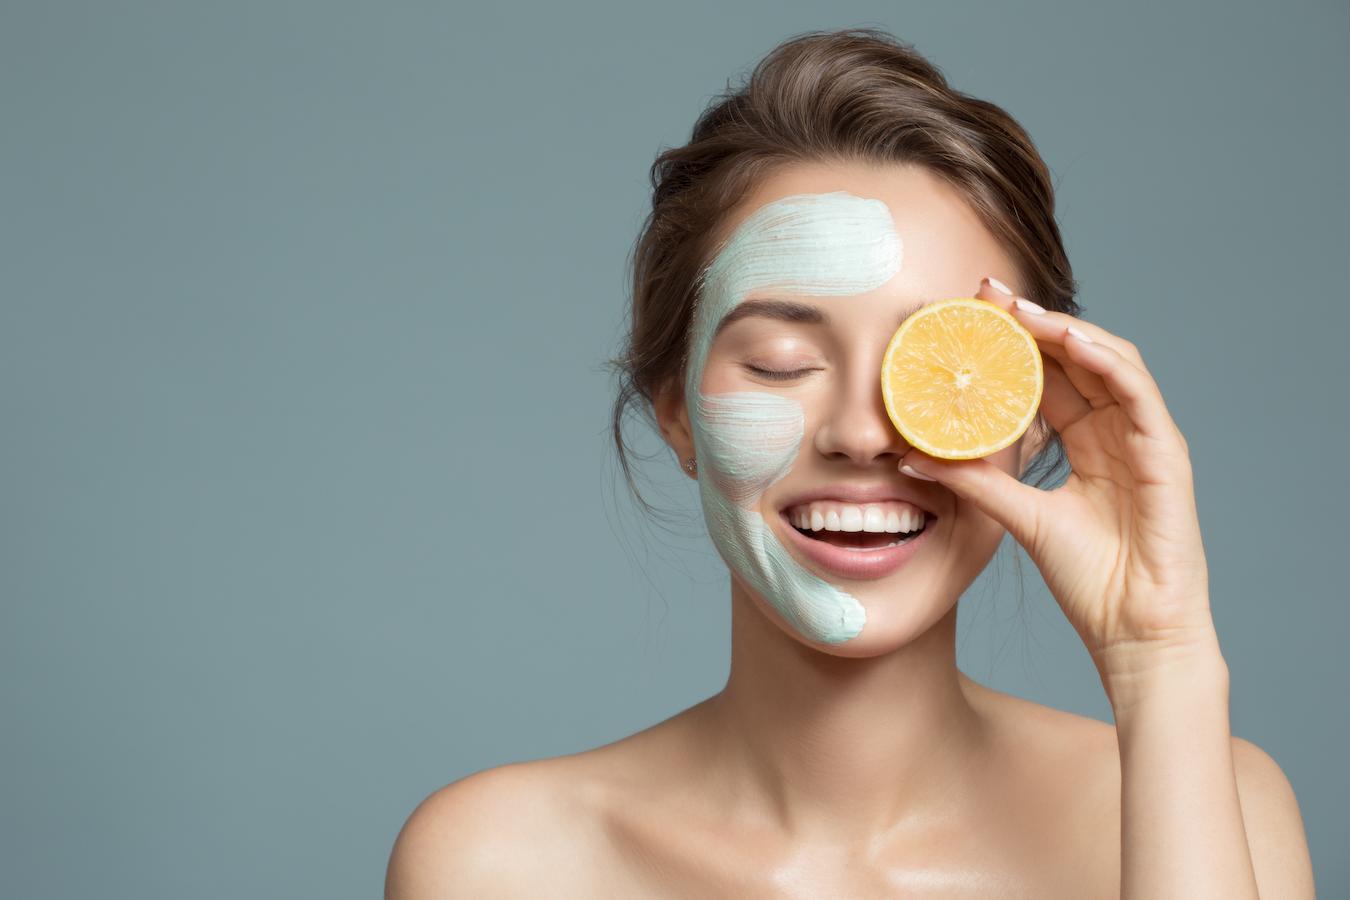 Use a vitamin c serum if you're looking to boost your skin's brightness